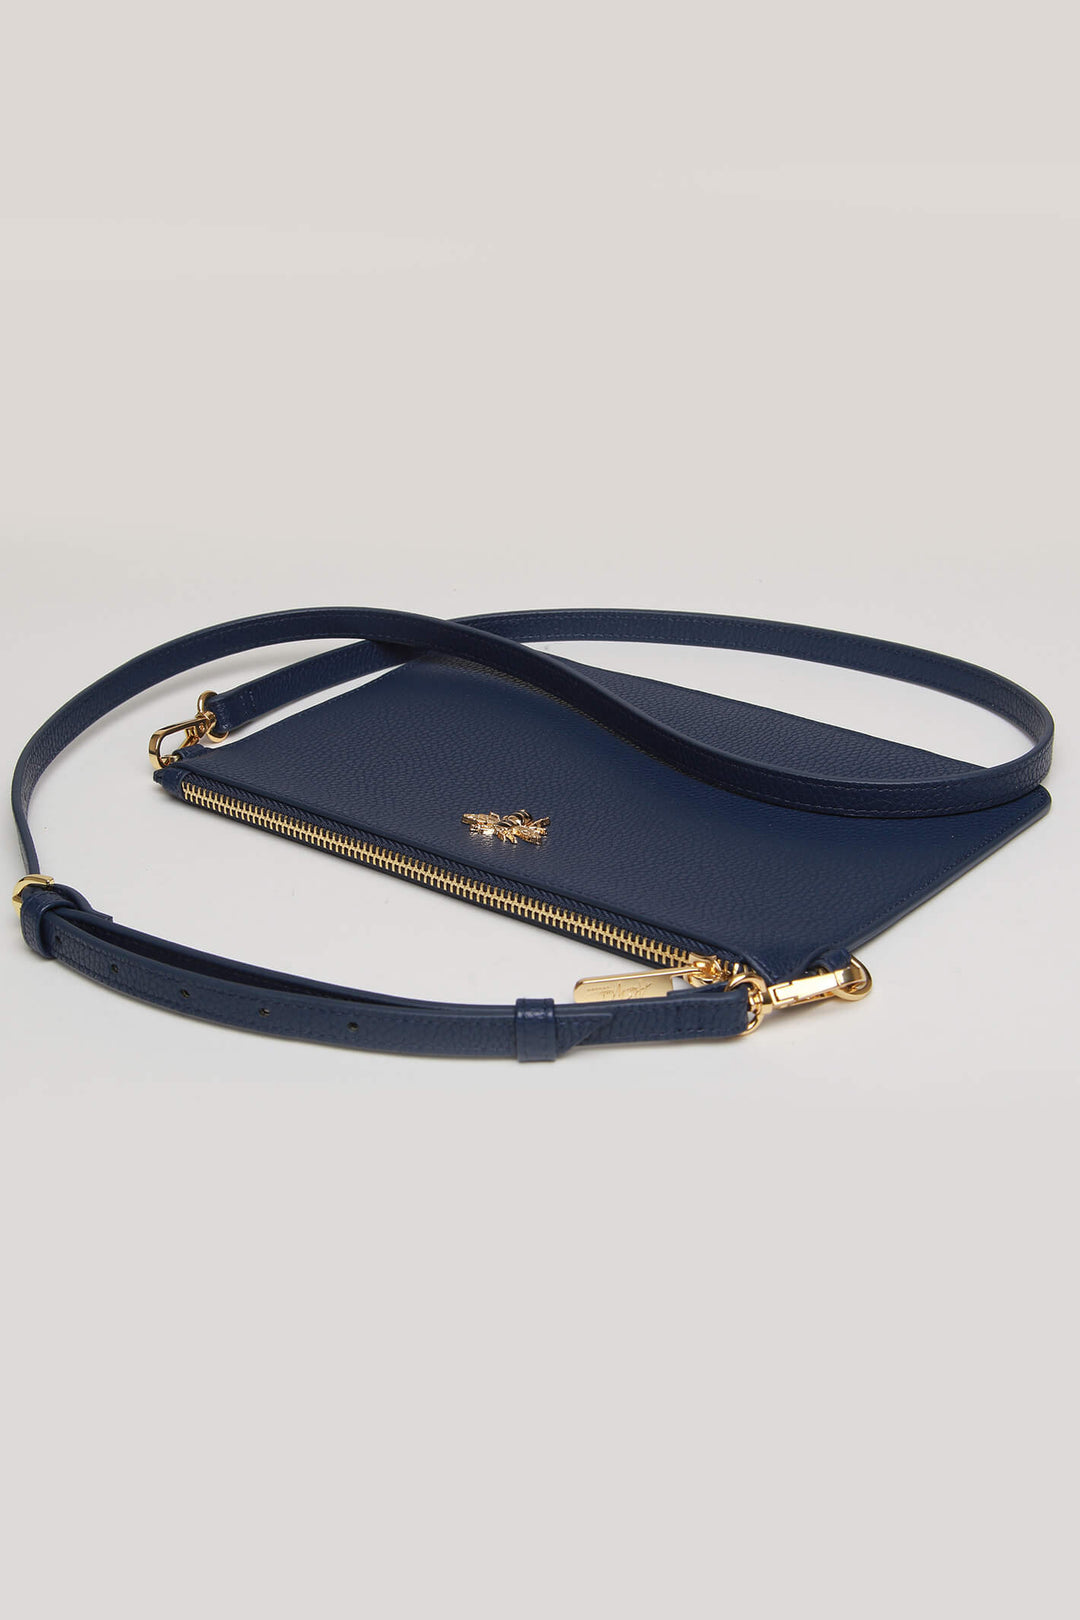 Alice Wheeler AW5752 Navy Ealing PhoneCluch Pouch Bag - Shirley Allum Boutique